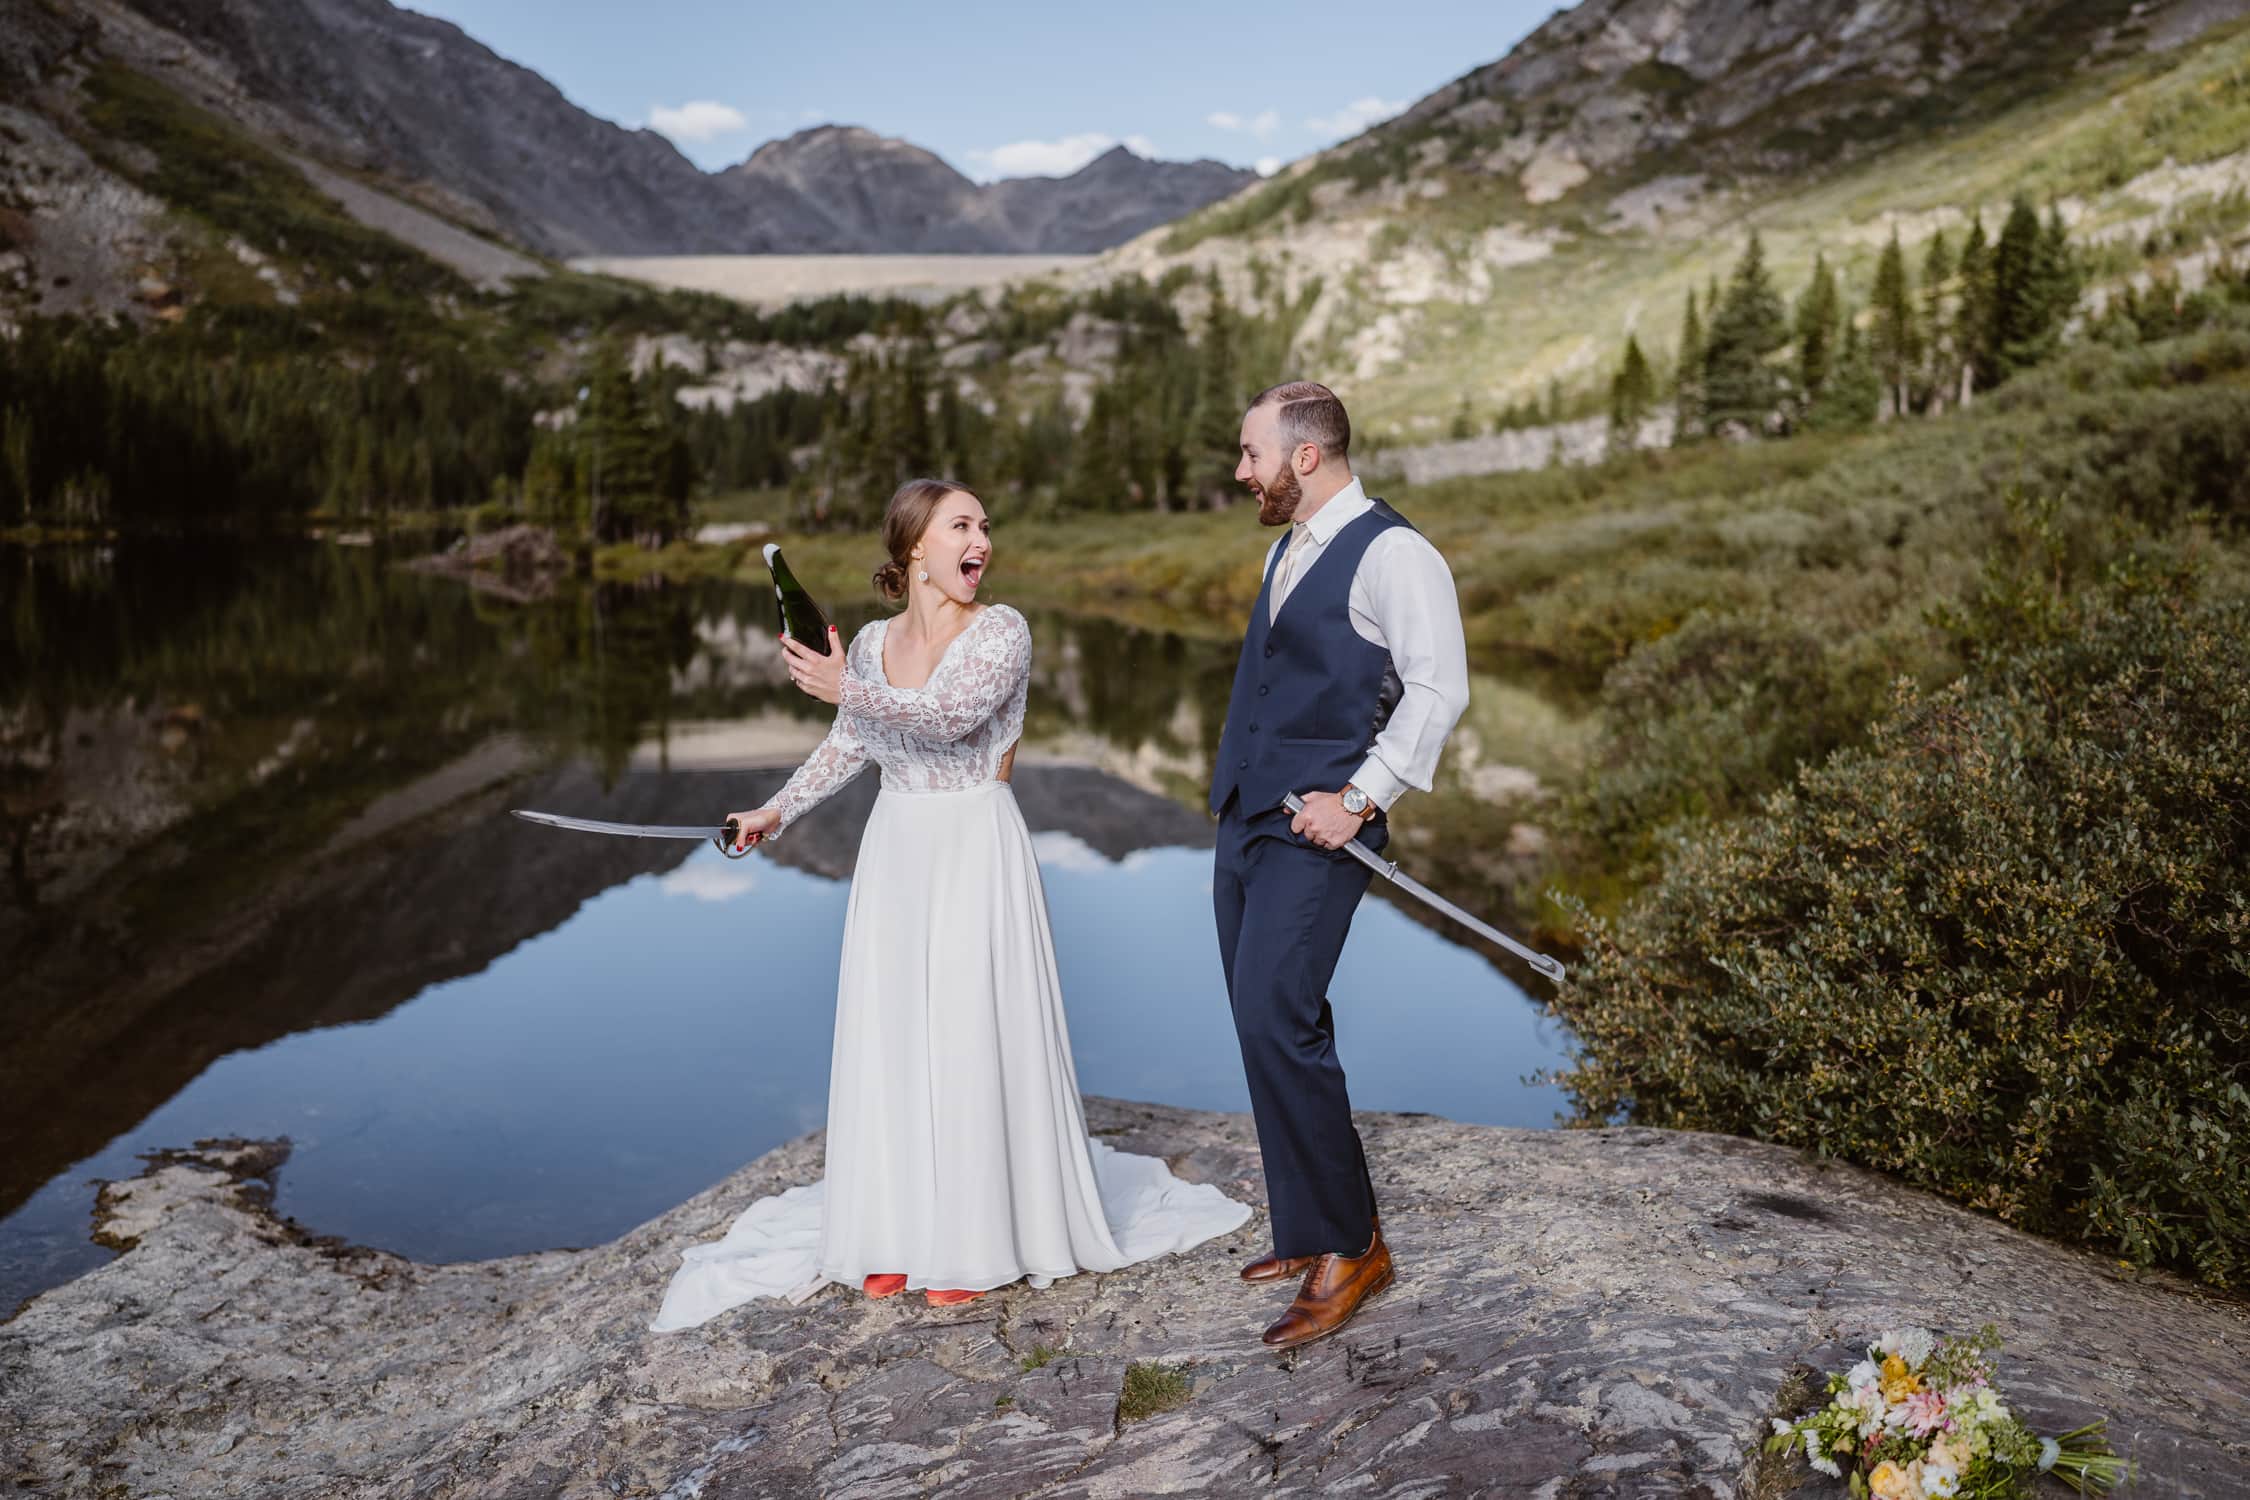 Husband and wife sabering champagne bottle on their elopement in Breckenridge.